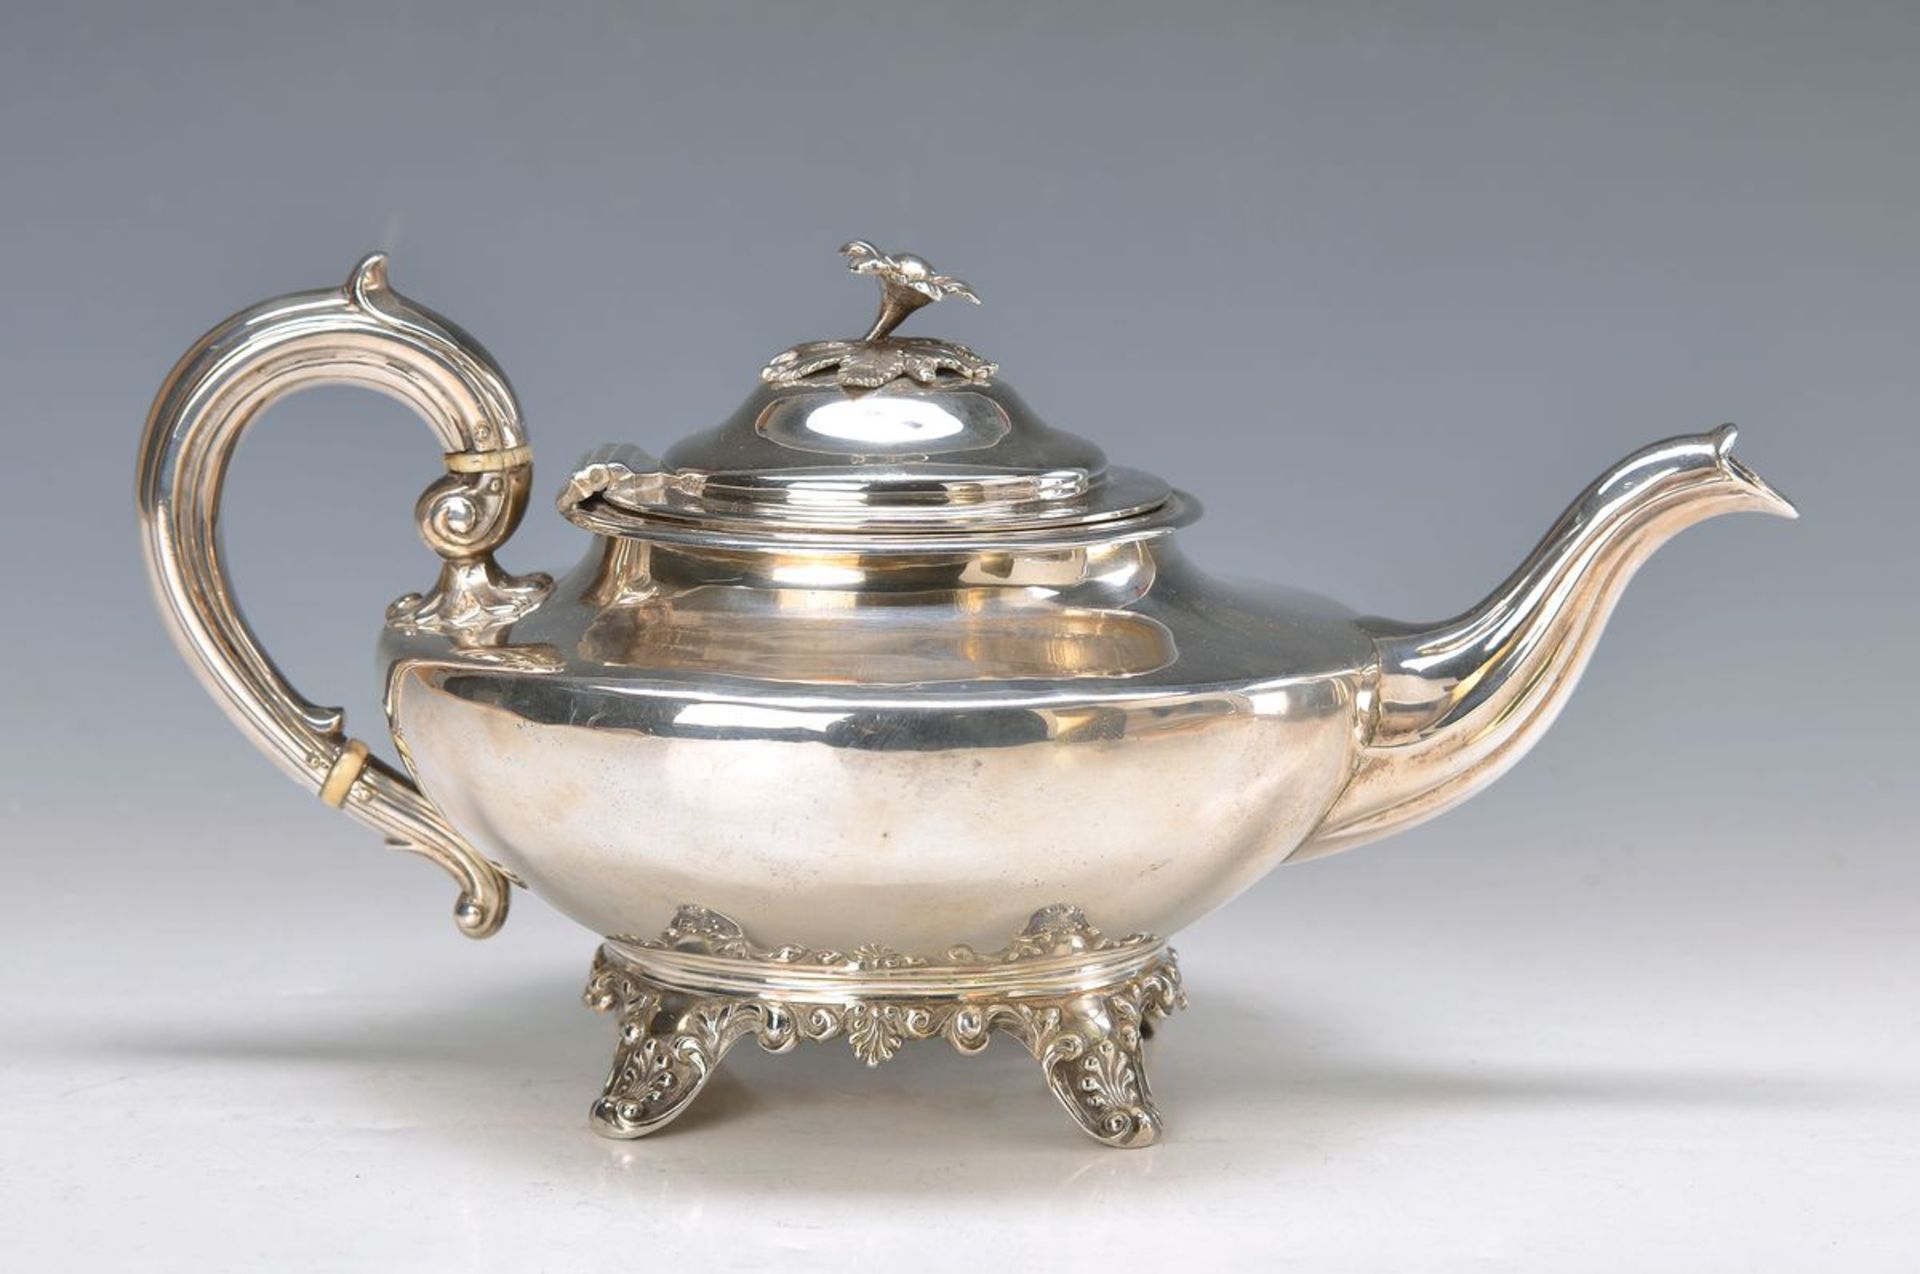 tea pot, London, 29.Mai until 20. Juni 1837, Sterling silver, brand mark only used for a short